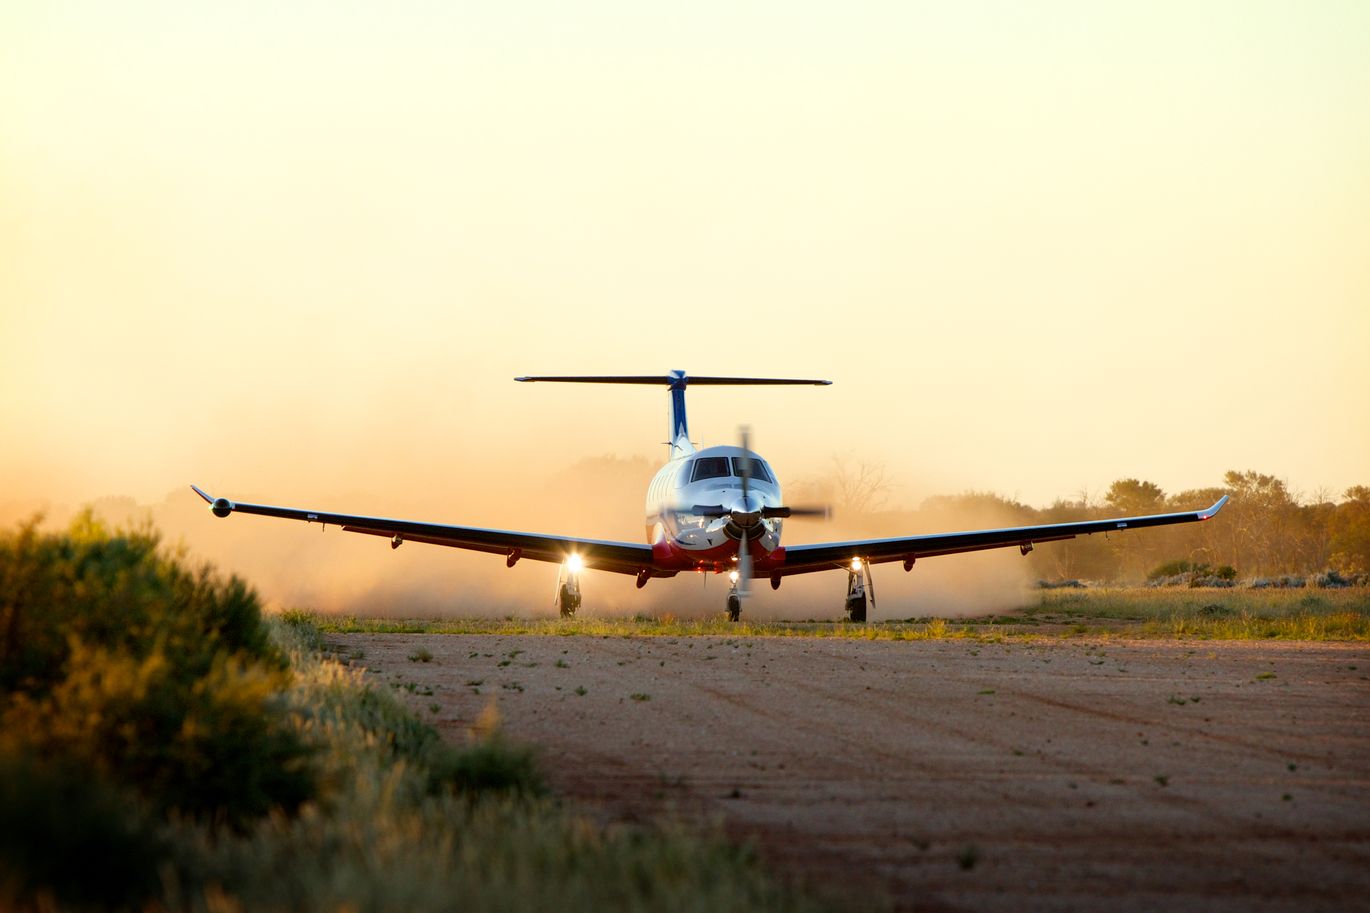 The 510-kilometre journey from Tennant Creek takes over five hours by road, but a RFDS ‘flying intensive care unit’ covers this ground in just 60 minu